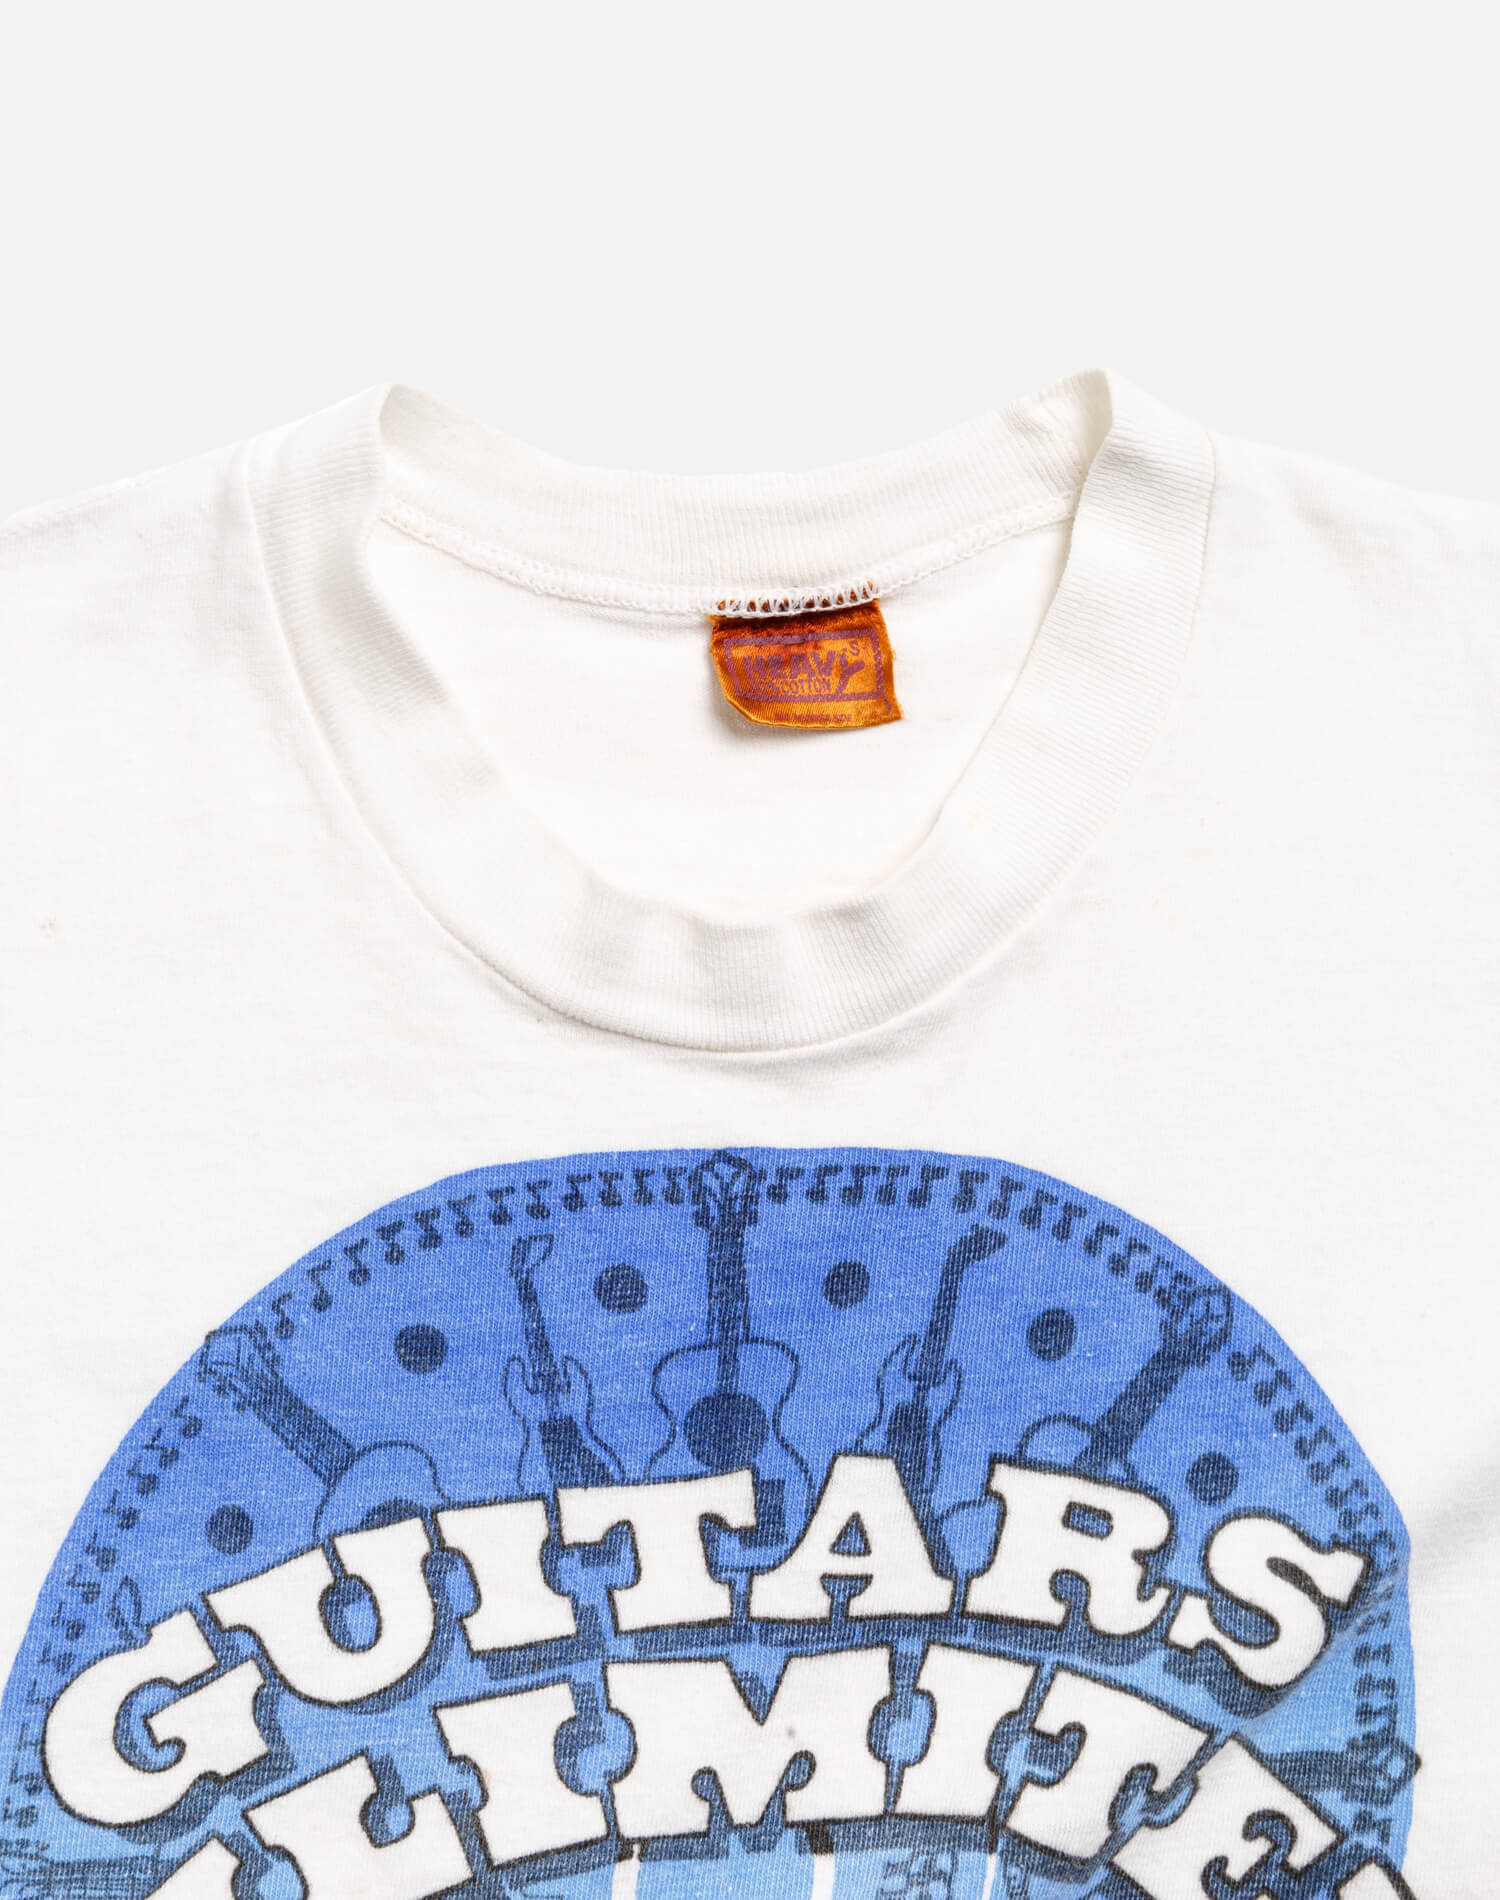 70s Guitars Unlimited Tee